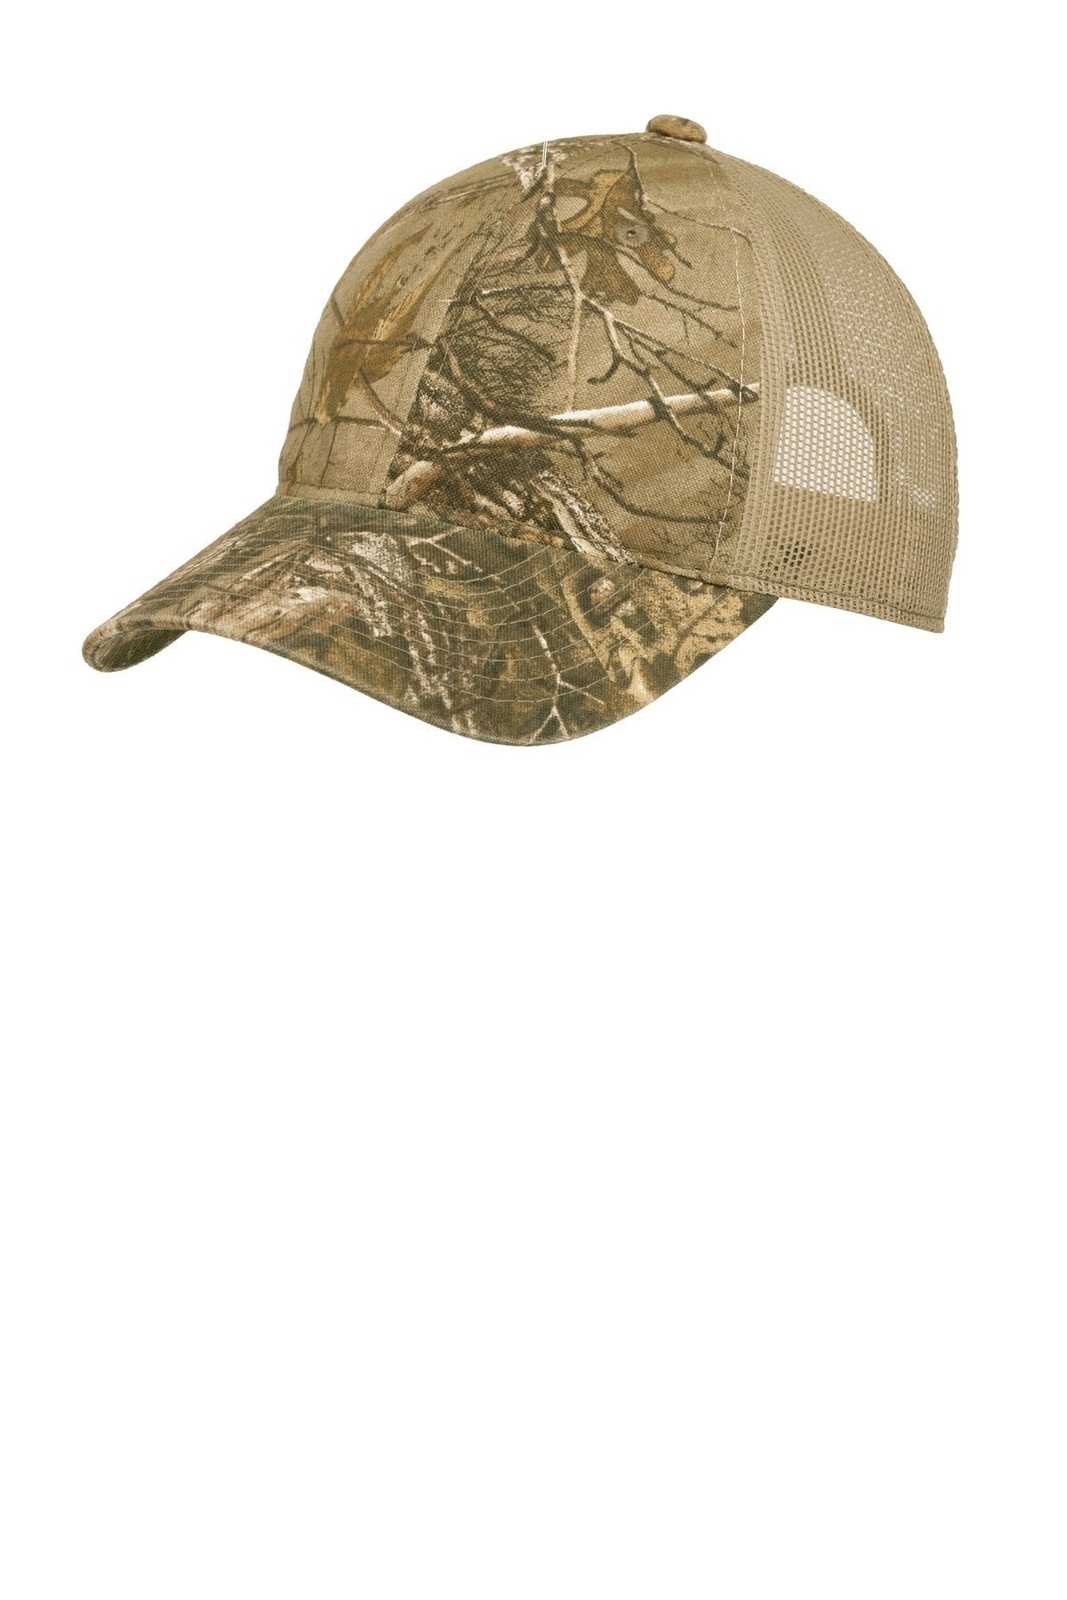 Port Authority C929 Unstructured Camouflage Mesh Back Cap - Realtree Xtra Tan - HIT a Double - 1